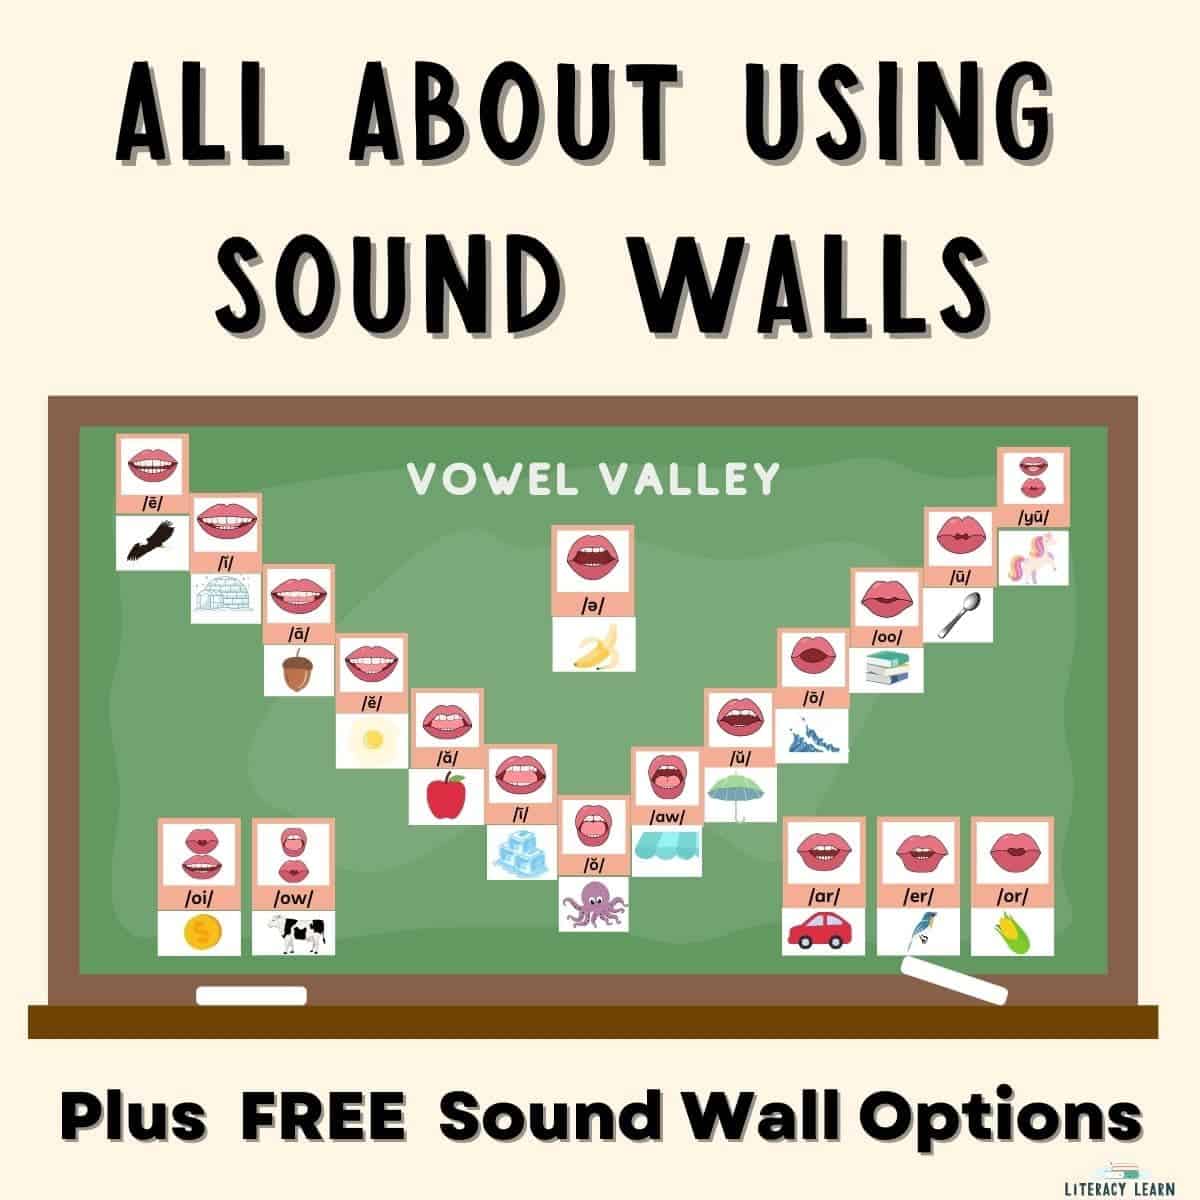 "All About Using Sound Walls" graphic with a sample sound wall displayed on a chalkboard.